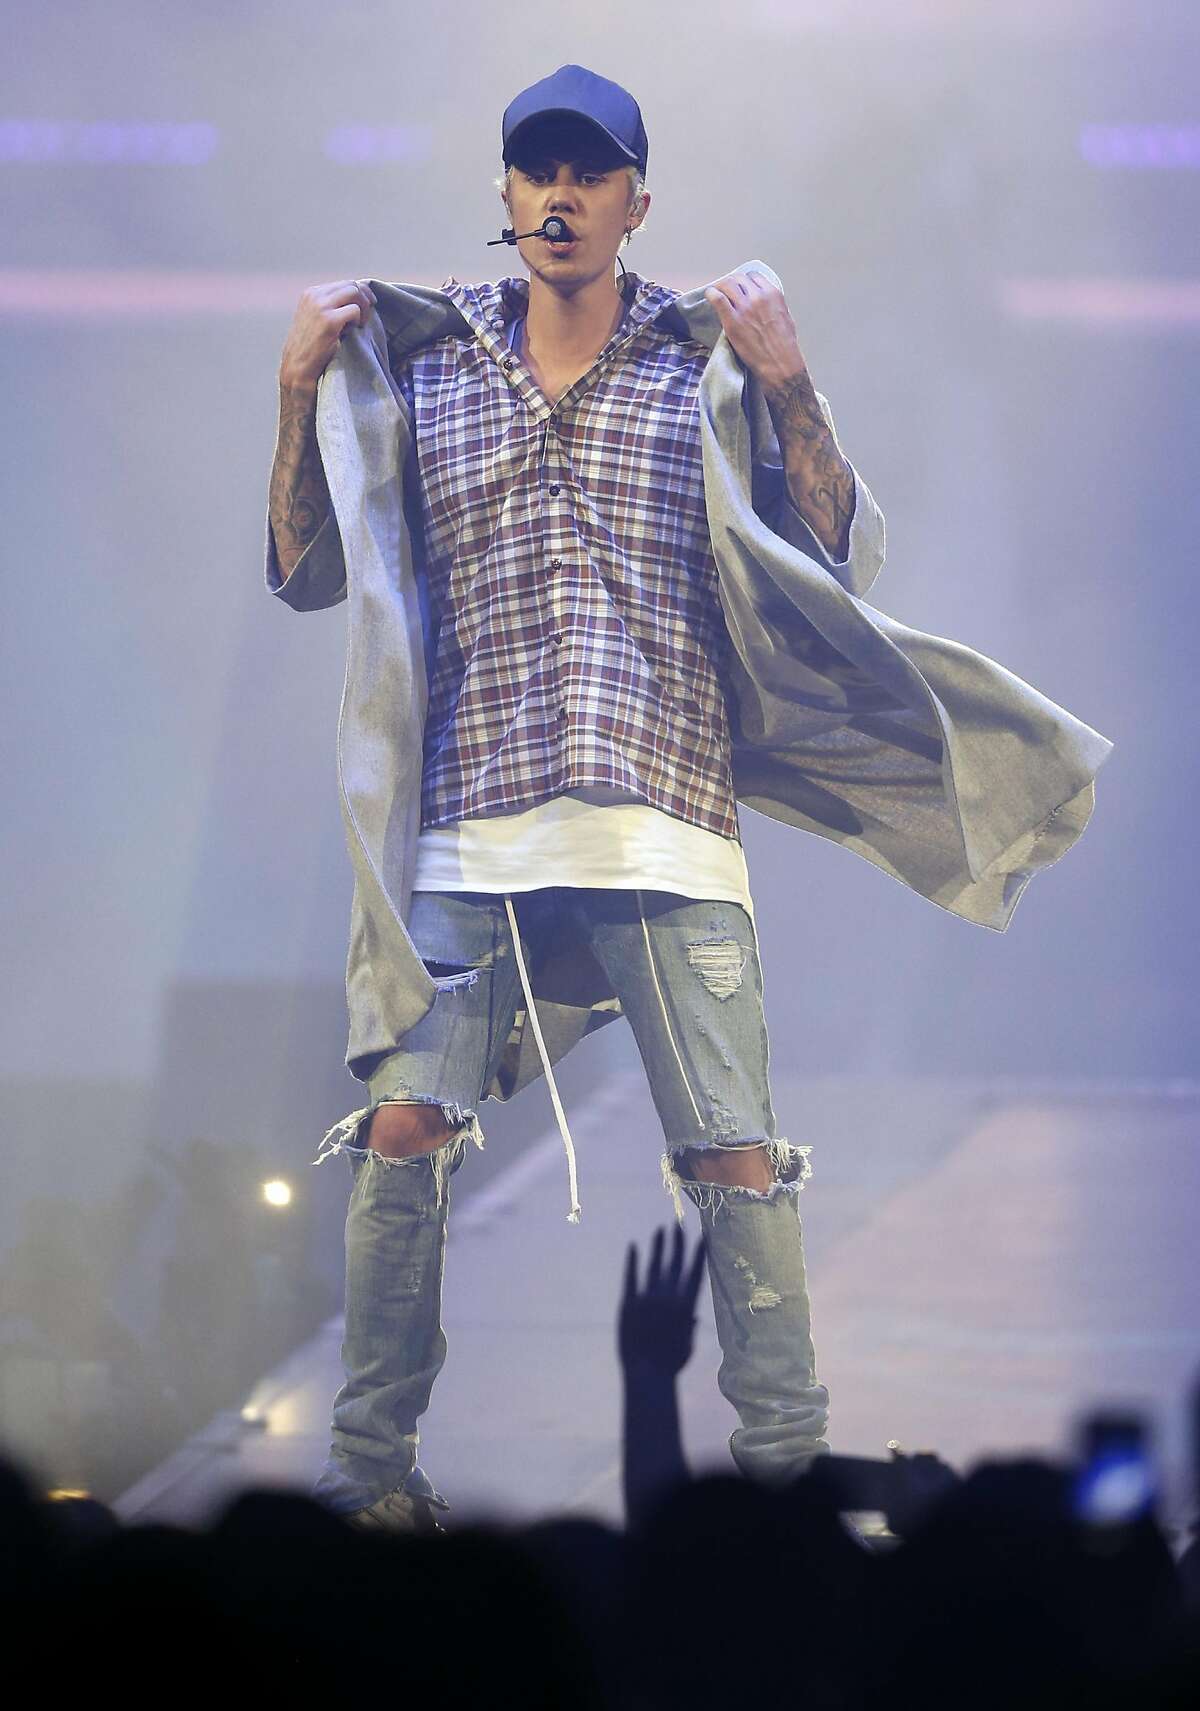 Justin Bieber performs at the SAP Center in San Jose, Calif., on Thursday, March 17, 2016.